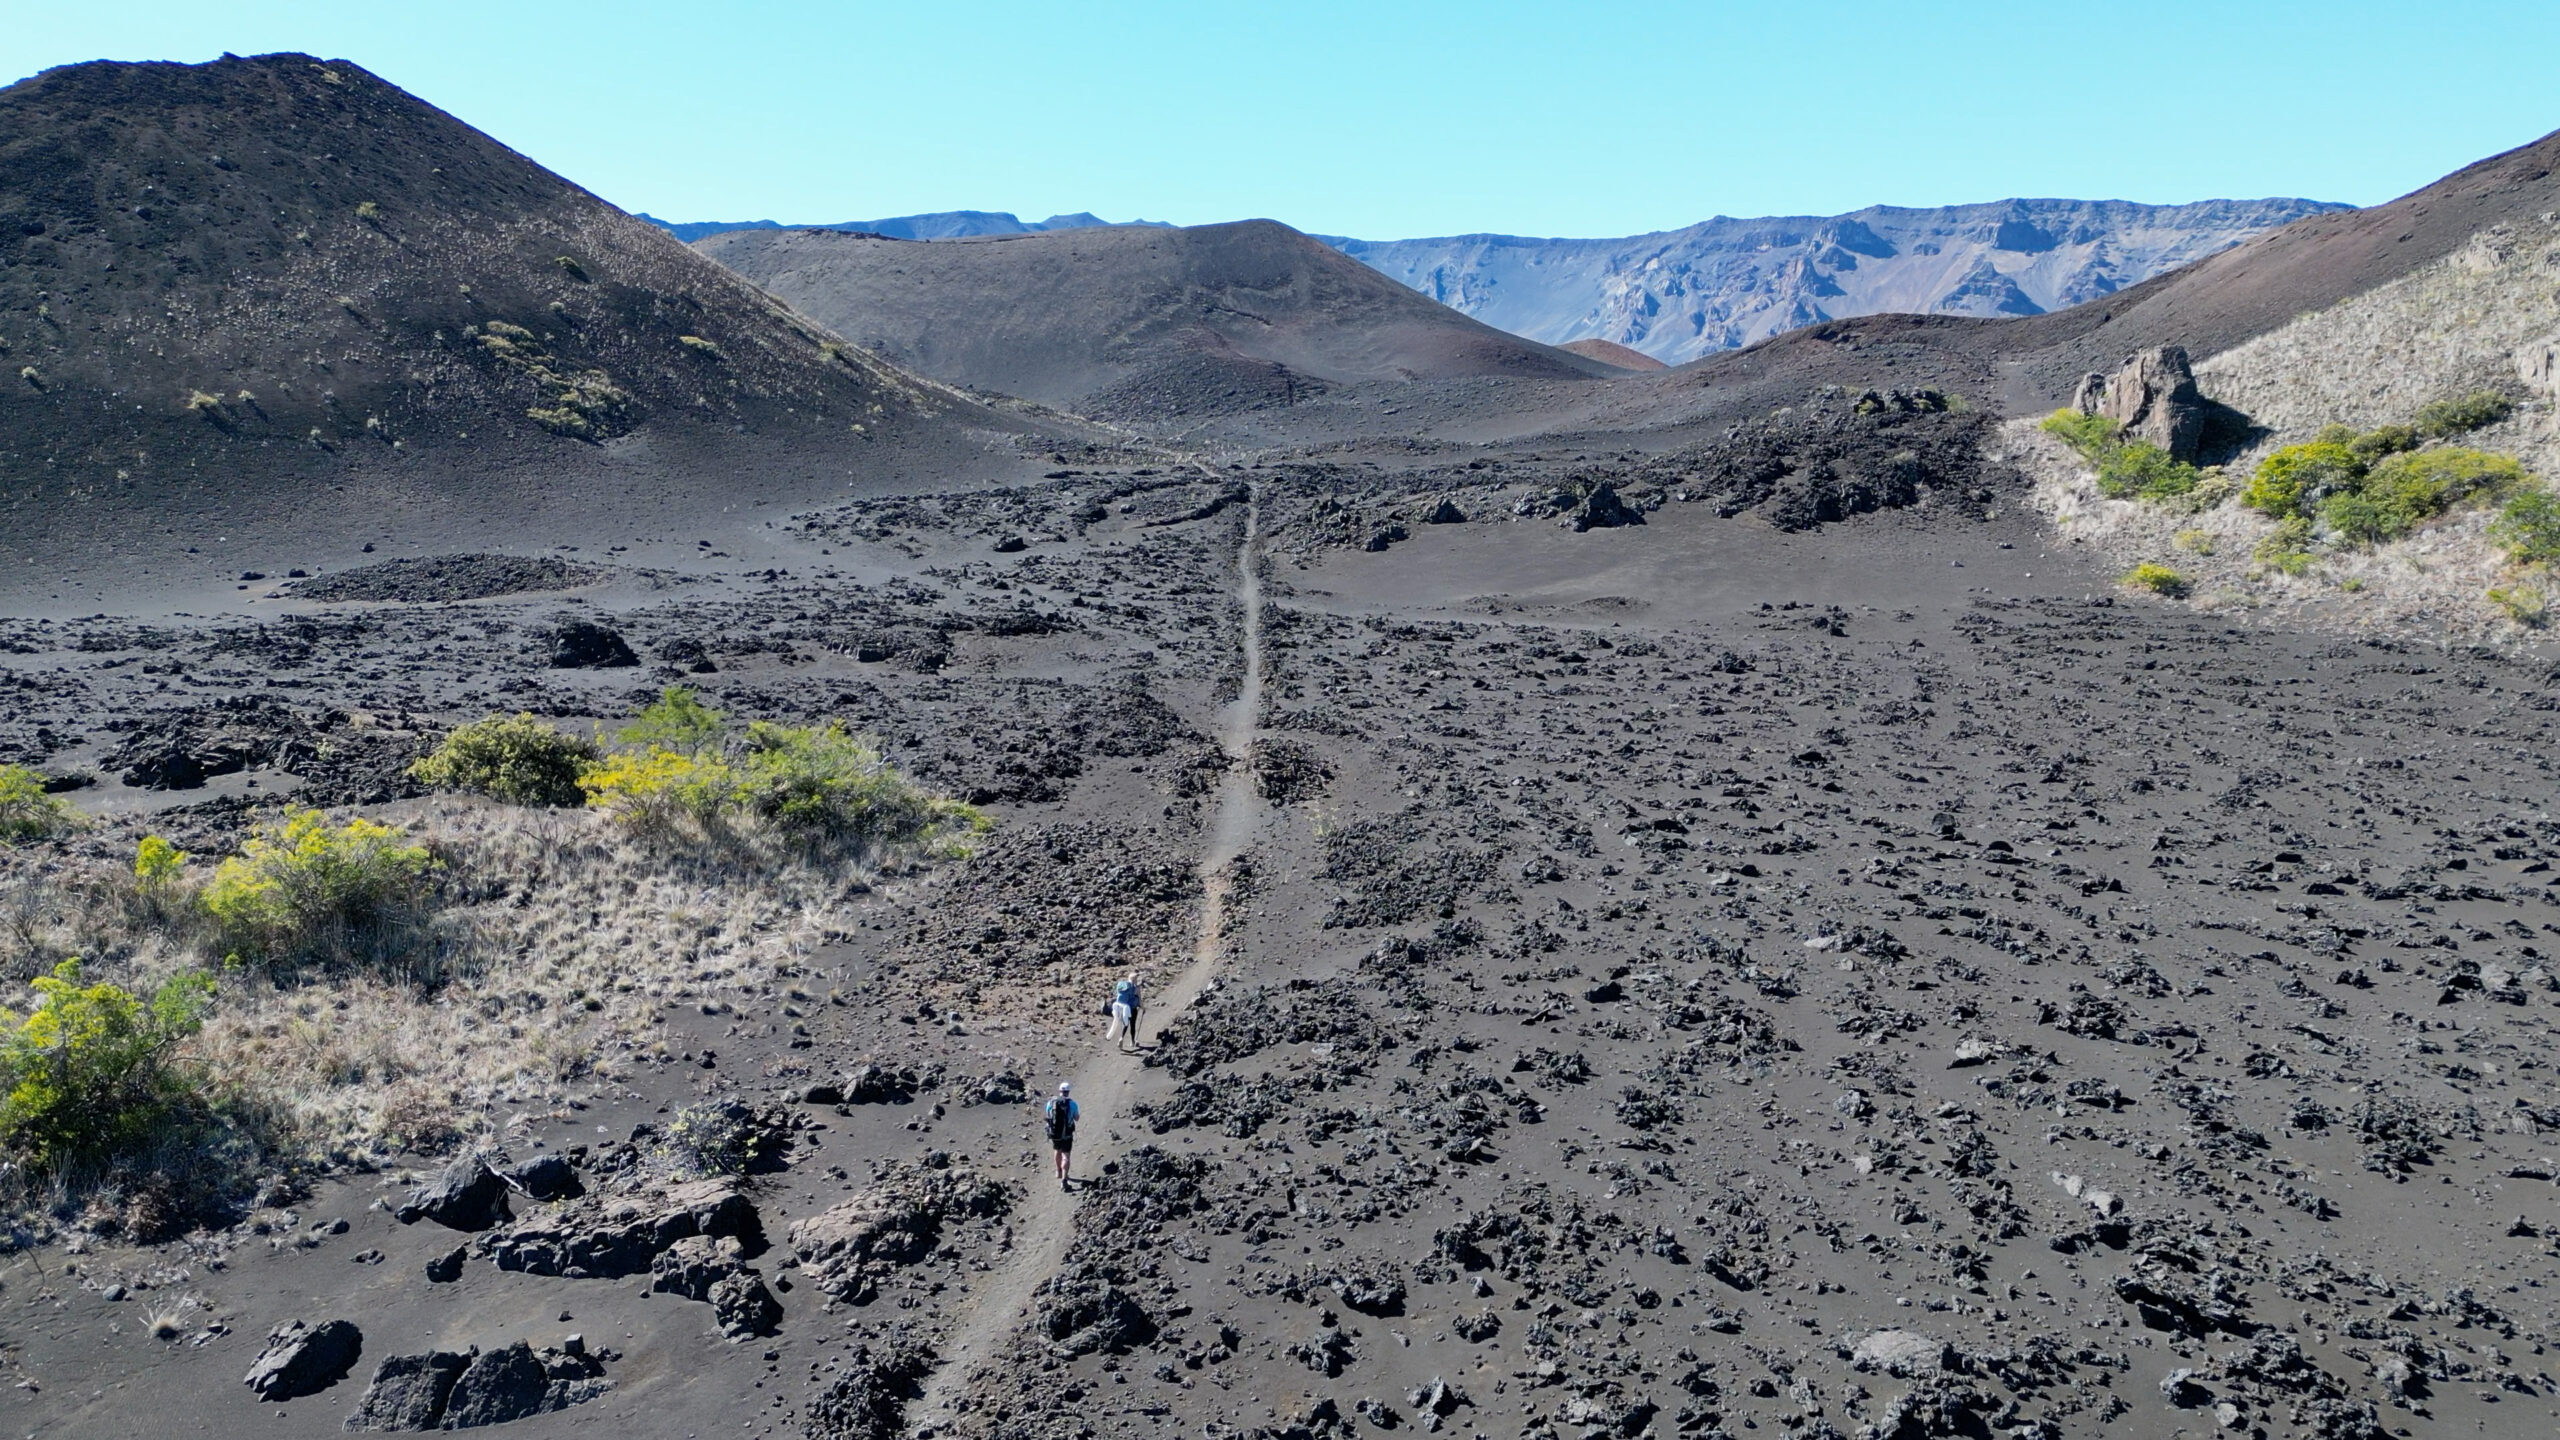 Backpackers hike through cooled lava.